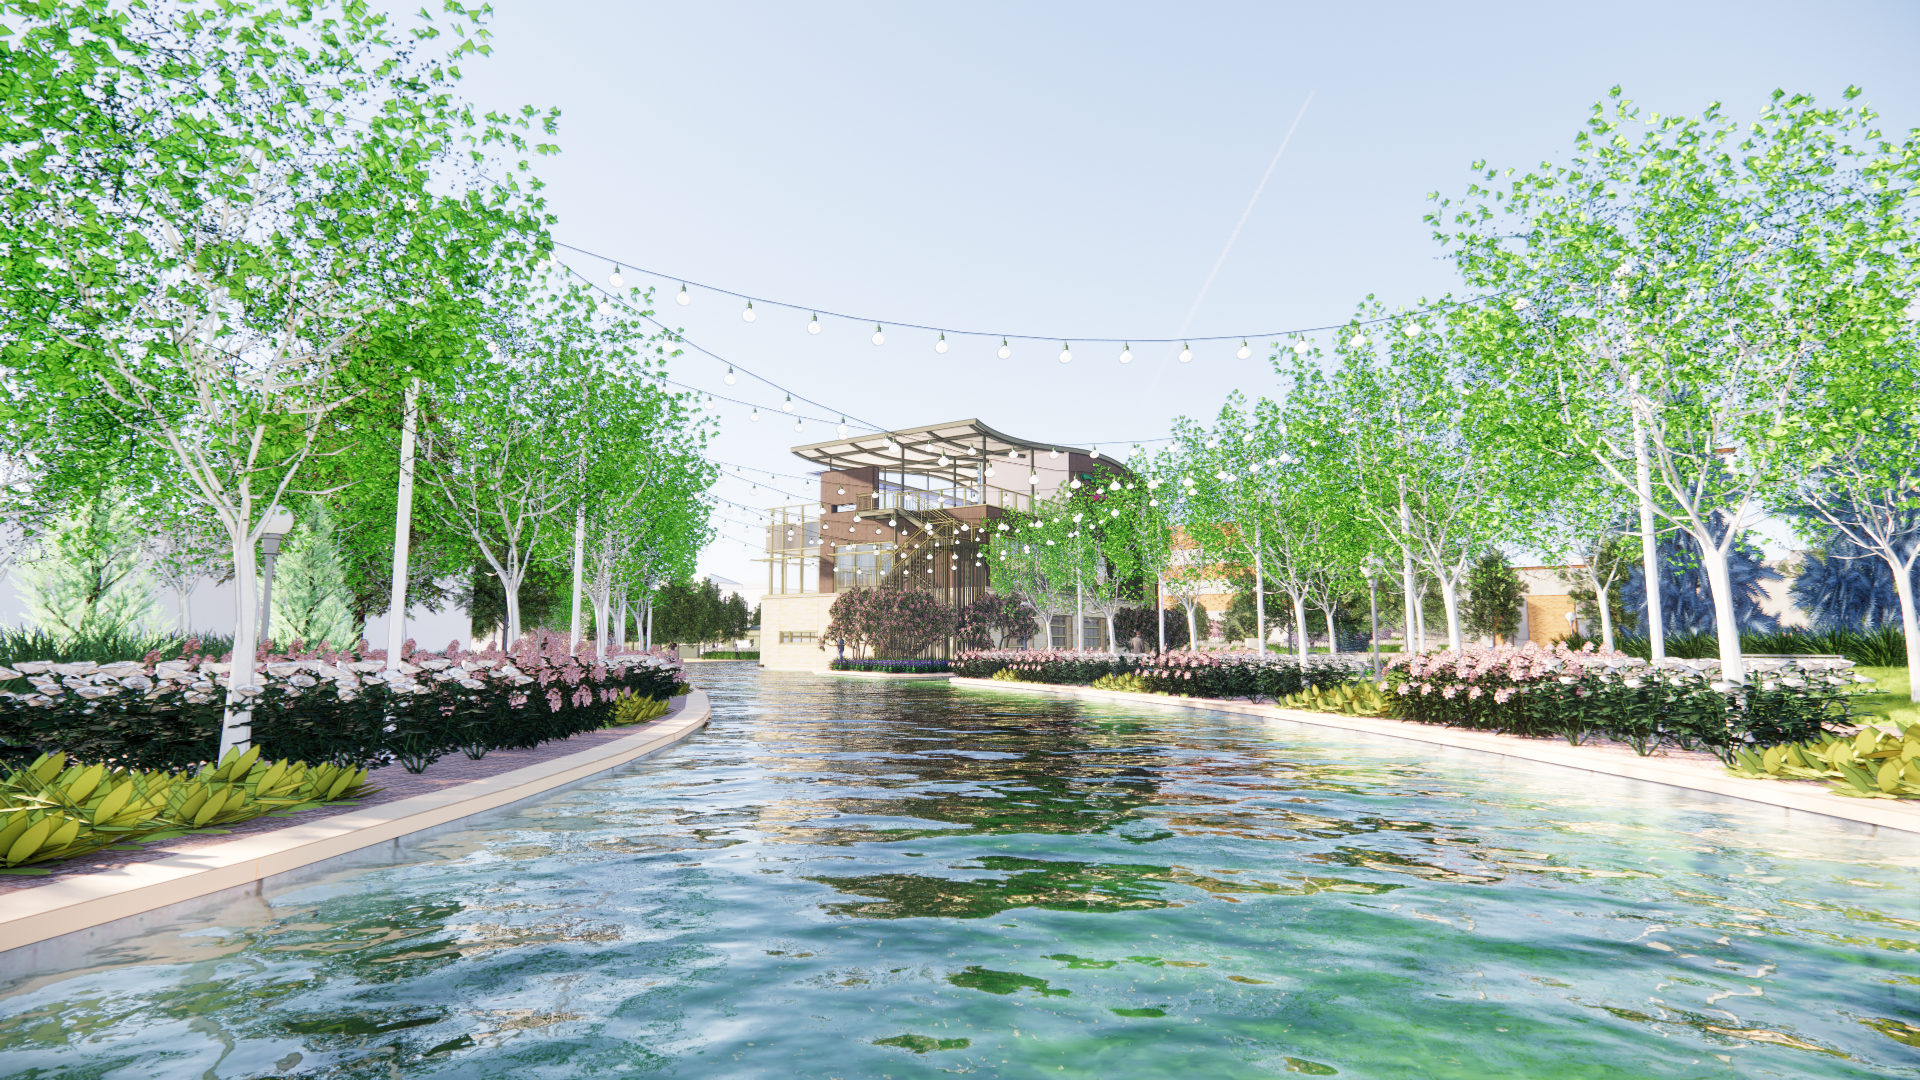 An artist's rendering shows a manmade waterway lined by trees and flowers leading to a modern style three level building